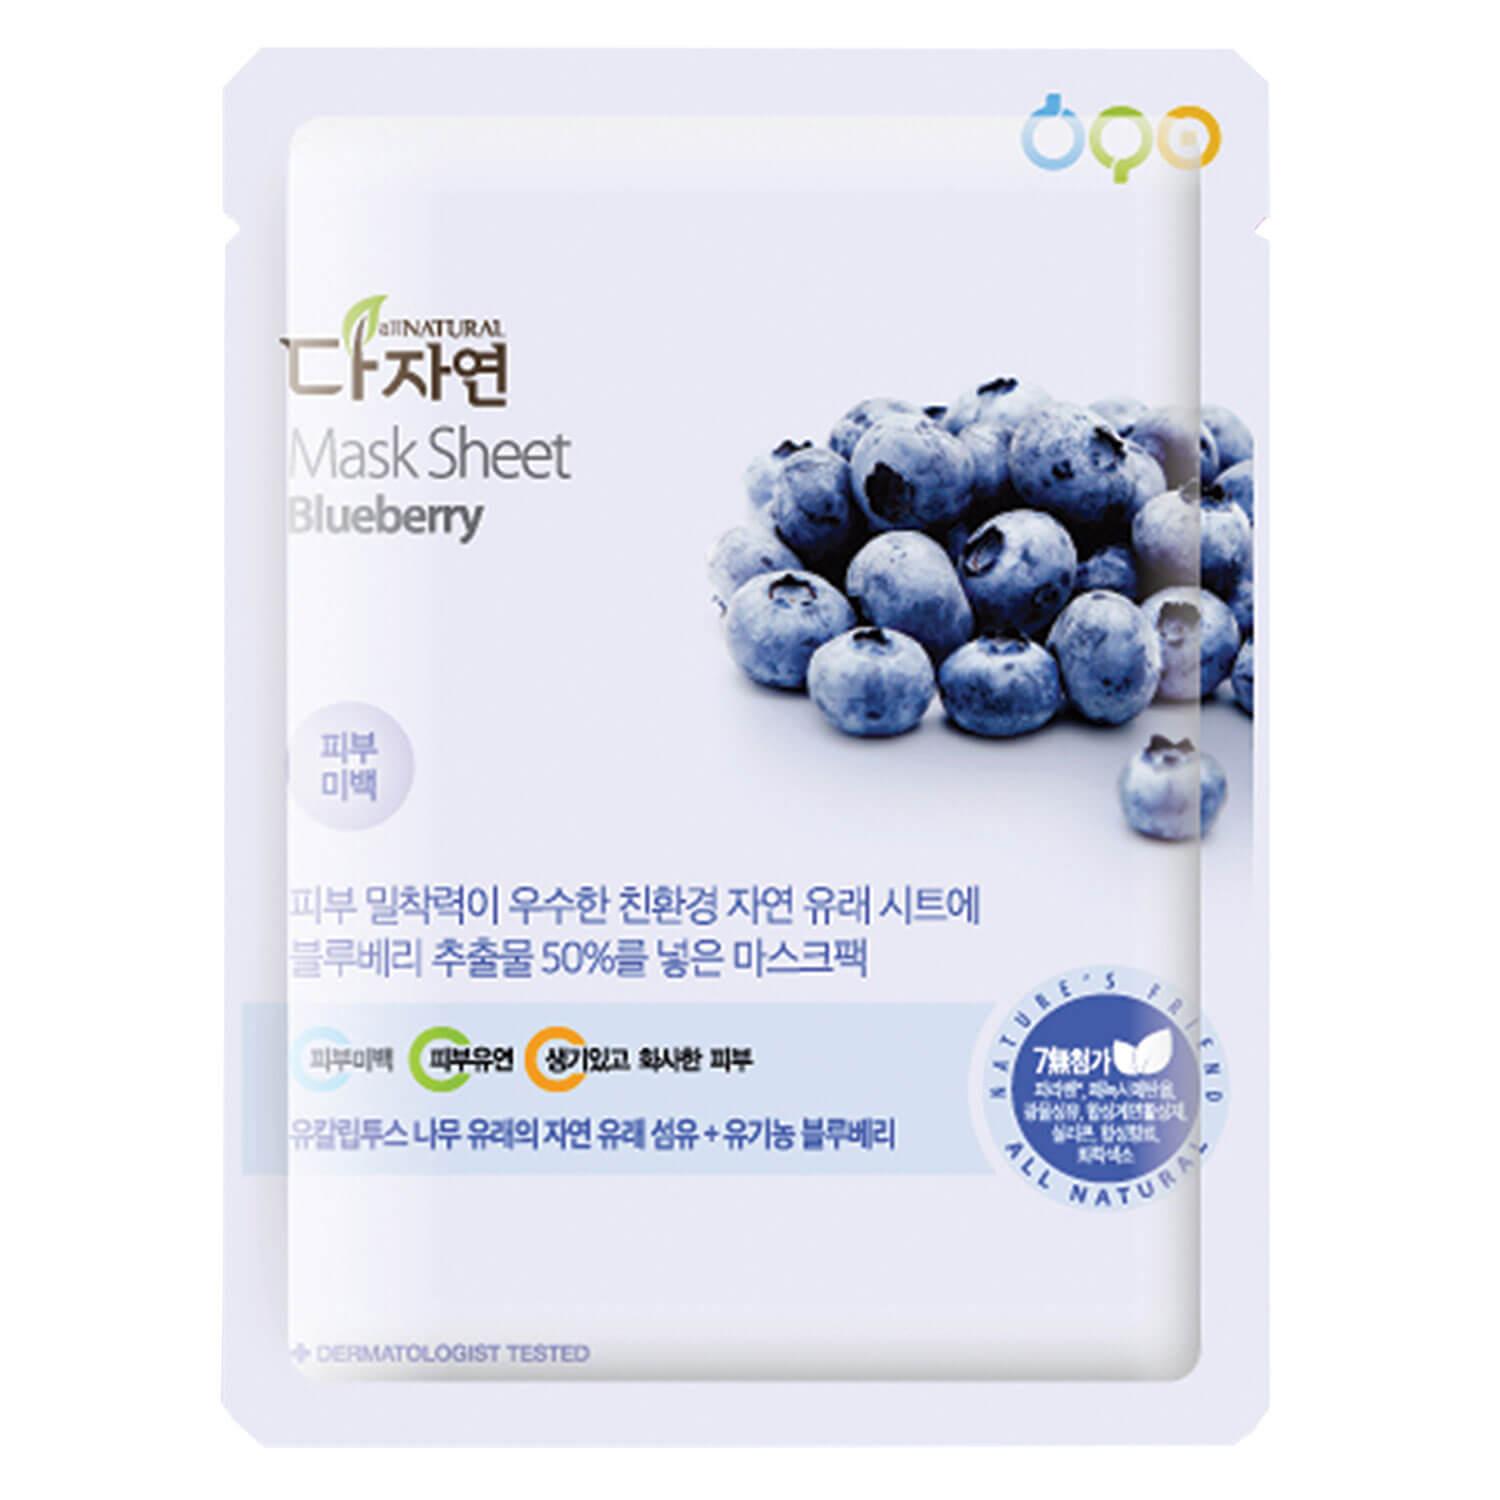 all NATURAL - Mask Sheet Blueberry